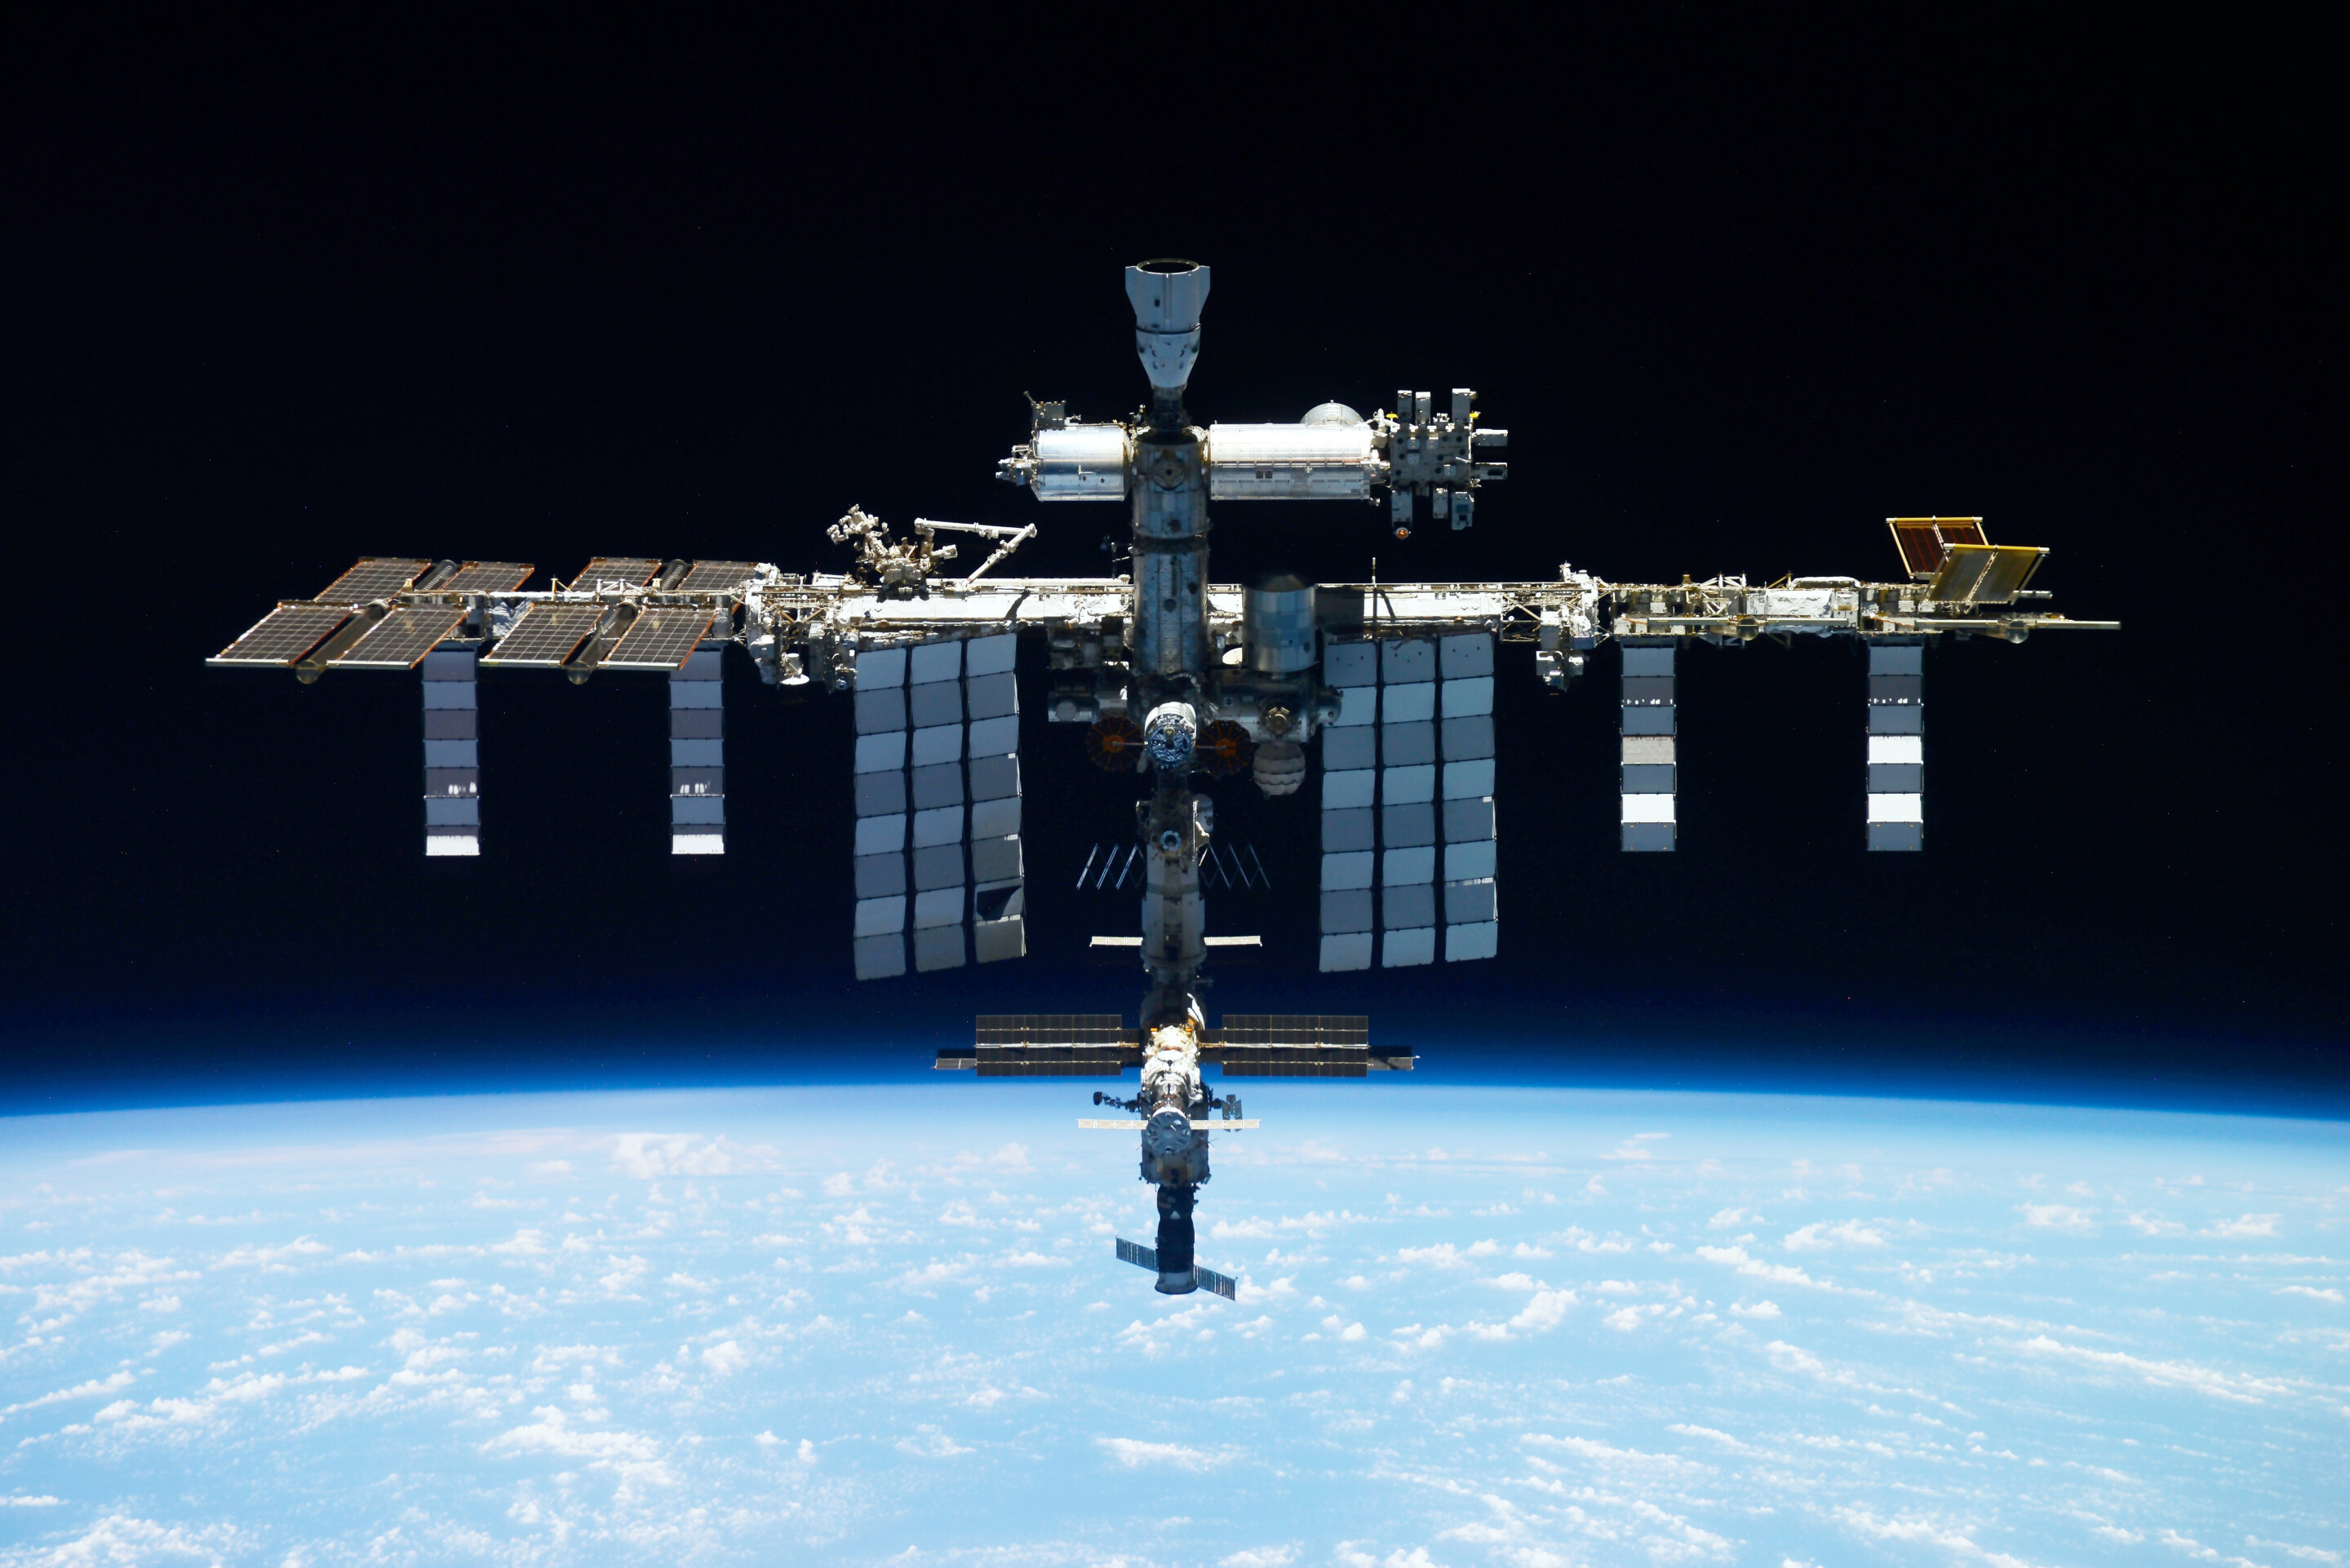 Temporary Power Outage at NASA Interrupts Communication with Space Station